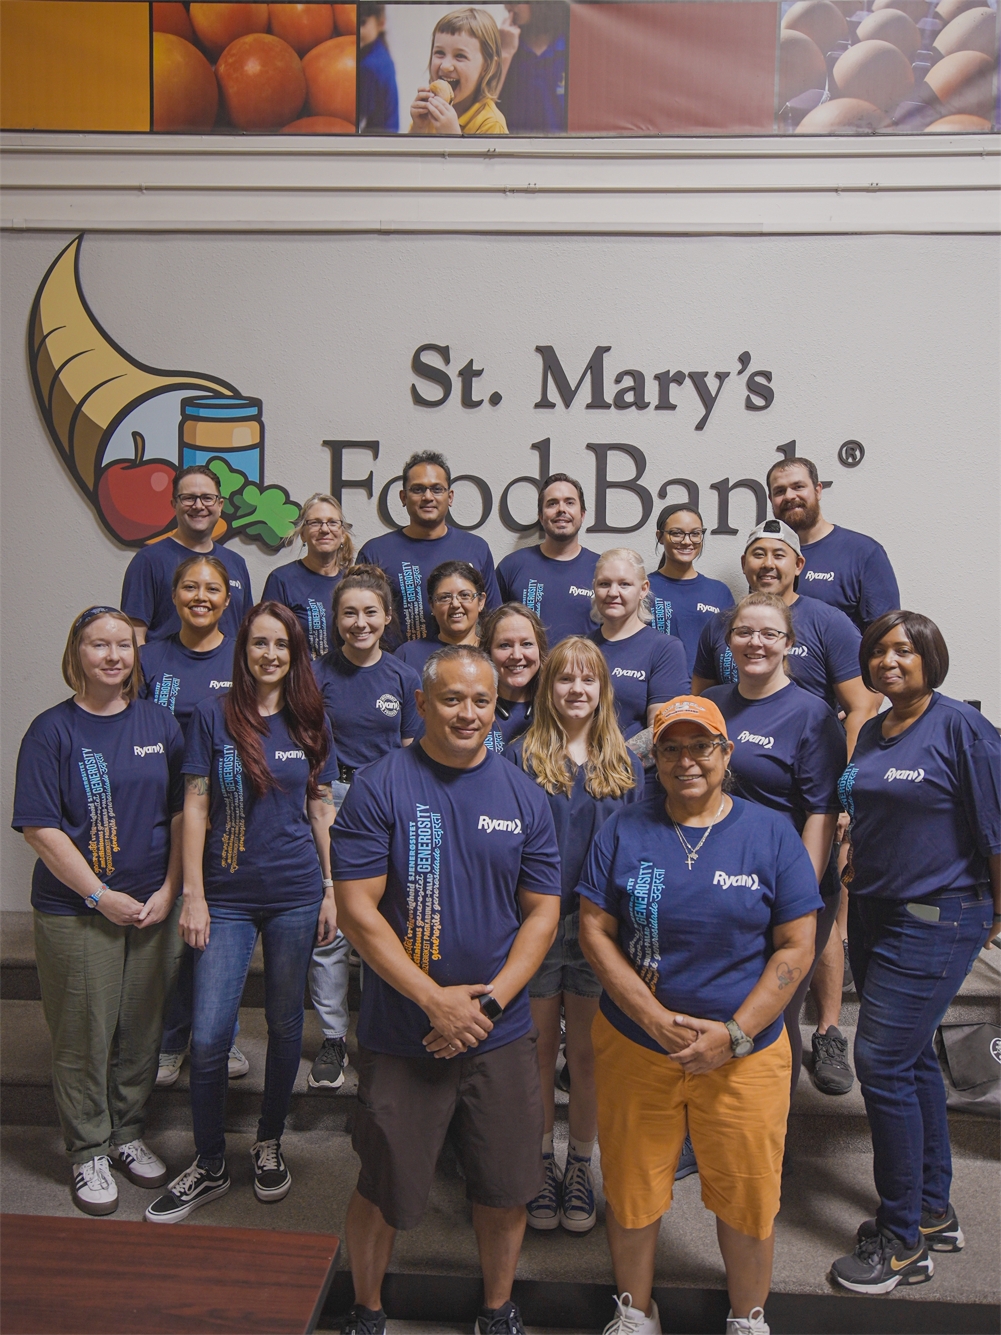 2.	Ryan Scottsdale team members worked hard to donate food to the people in need at the St. Mary Food Bank for RyanShares Day.